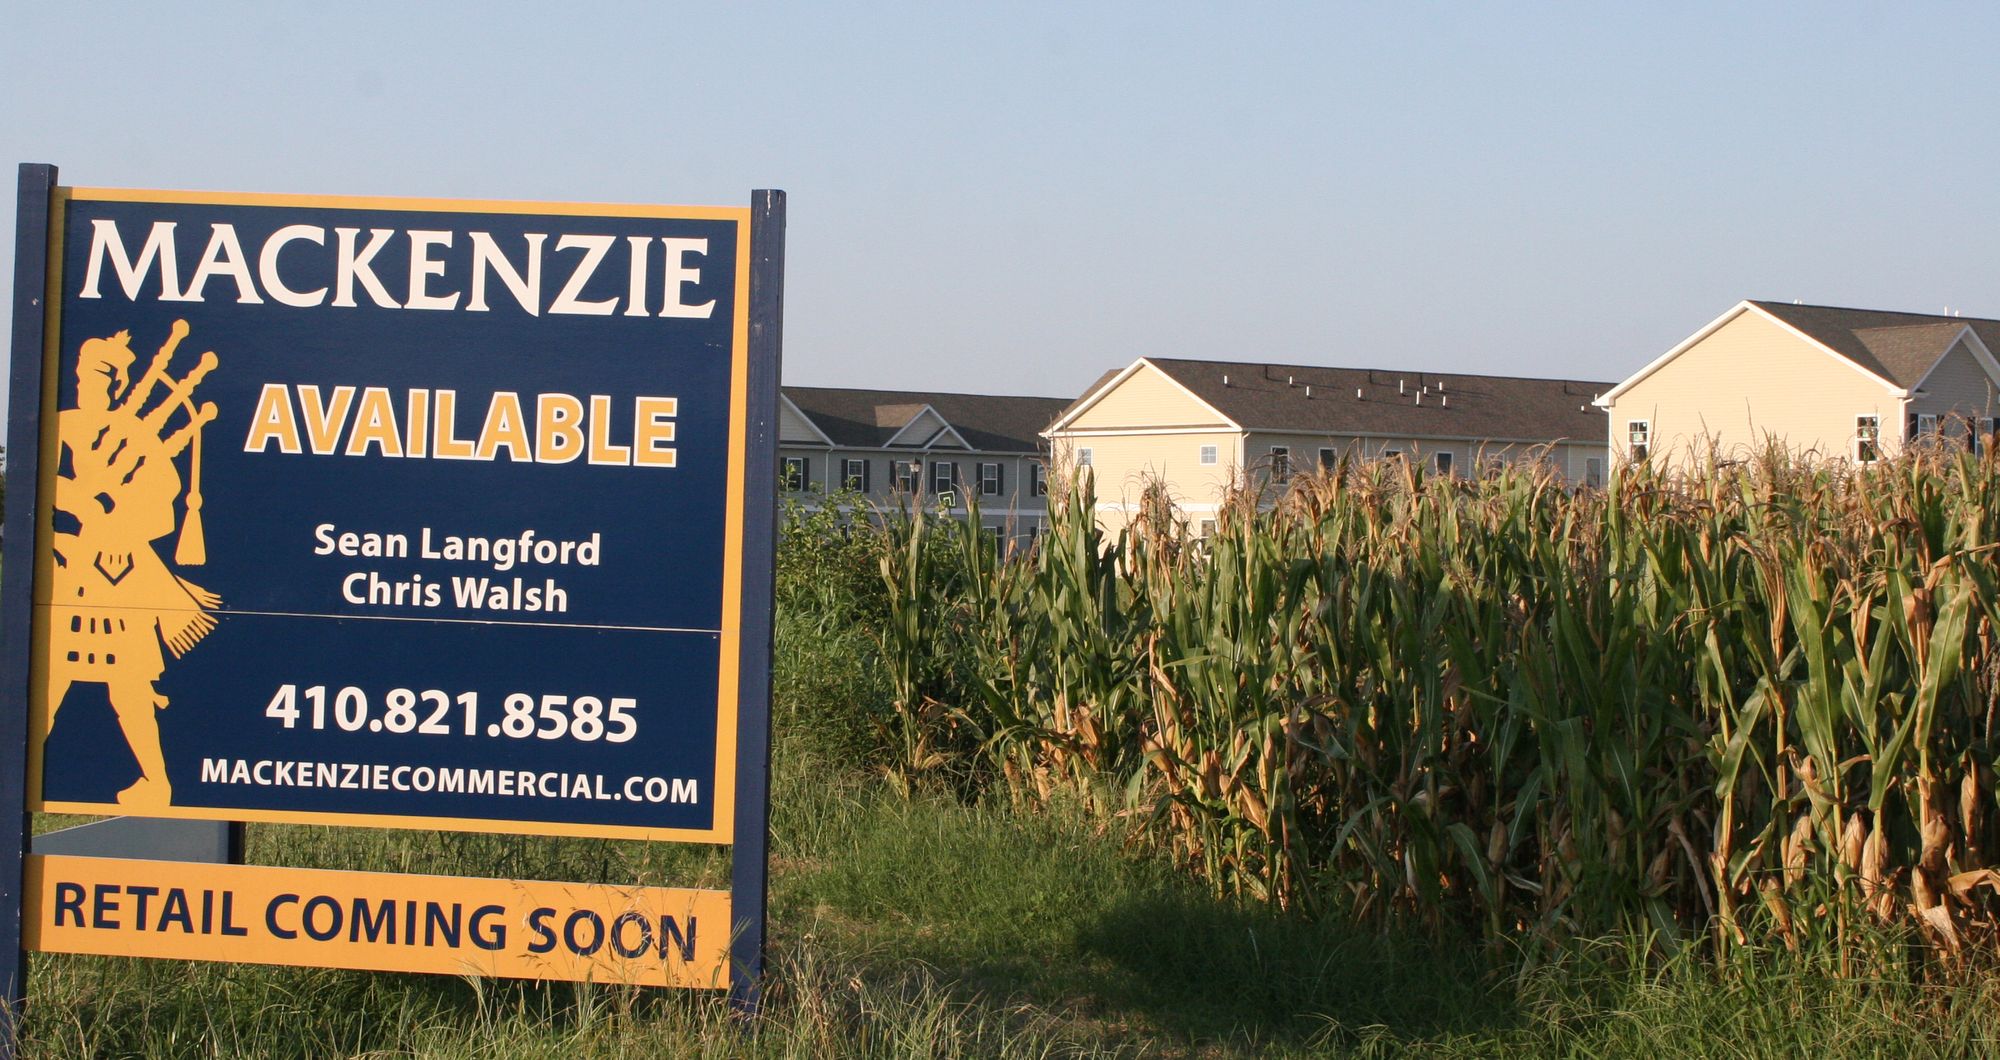 Bridgeville's growth boom set to continue with new development